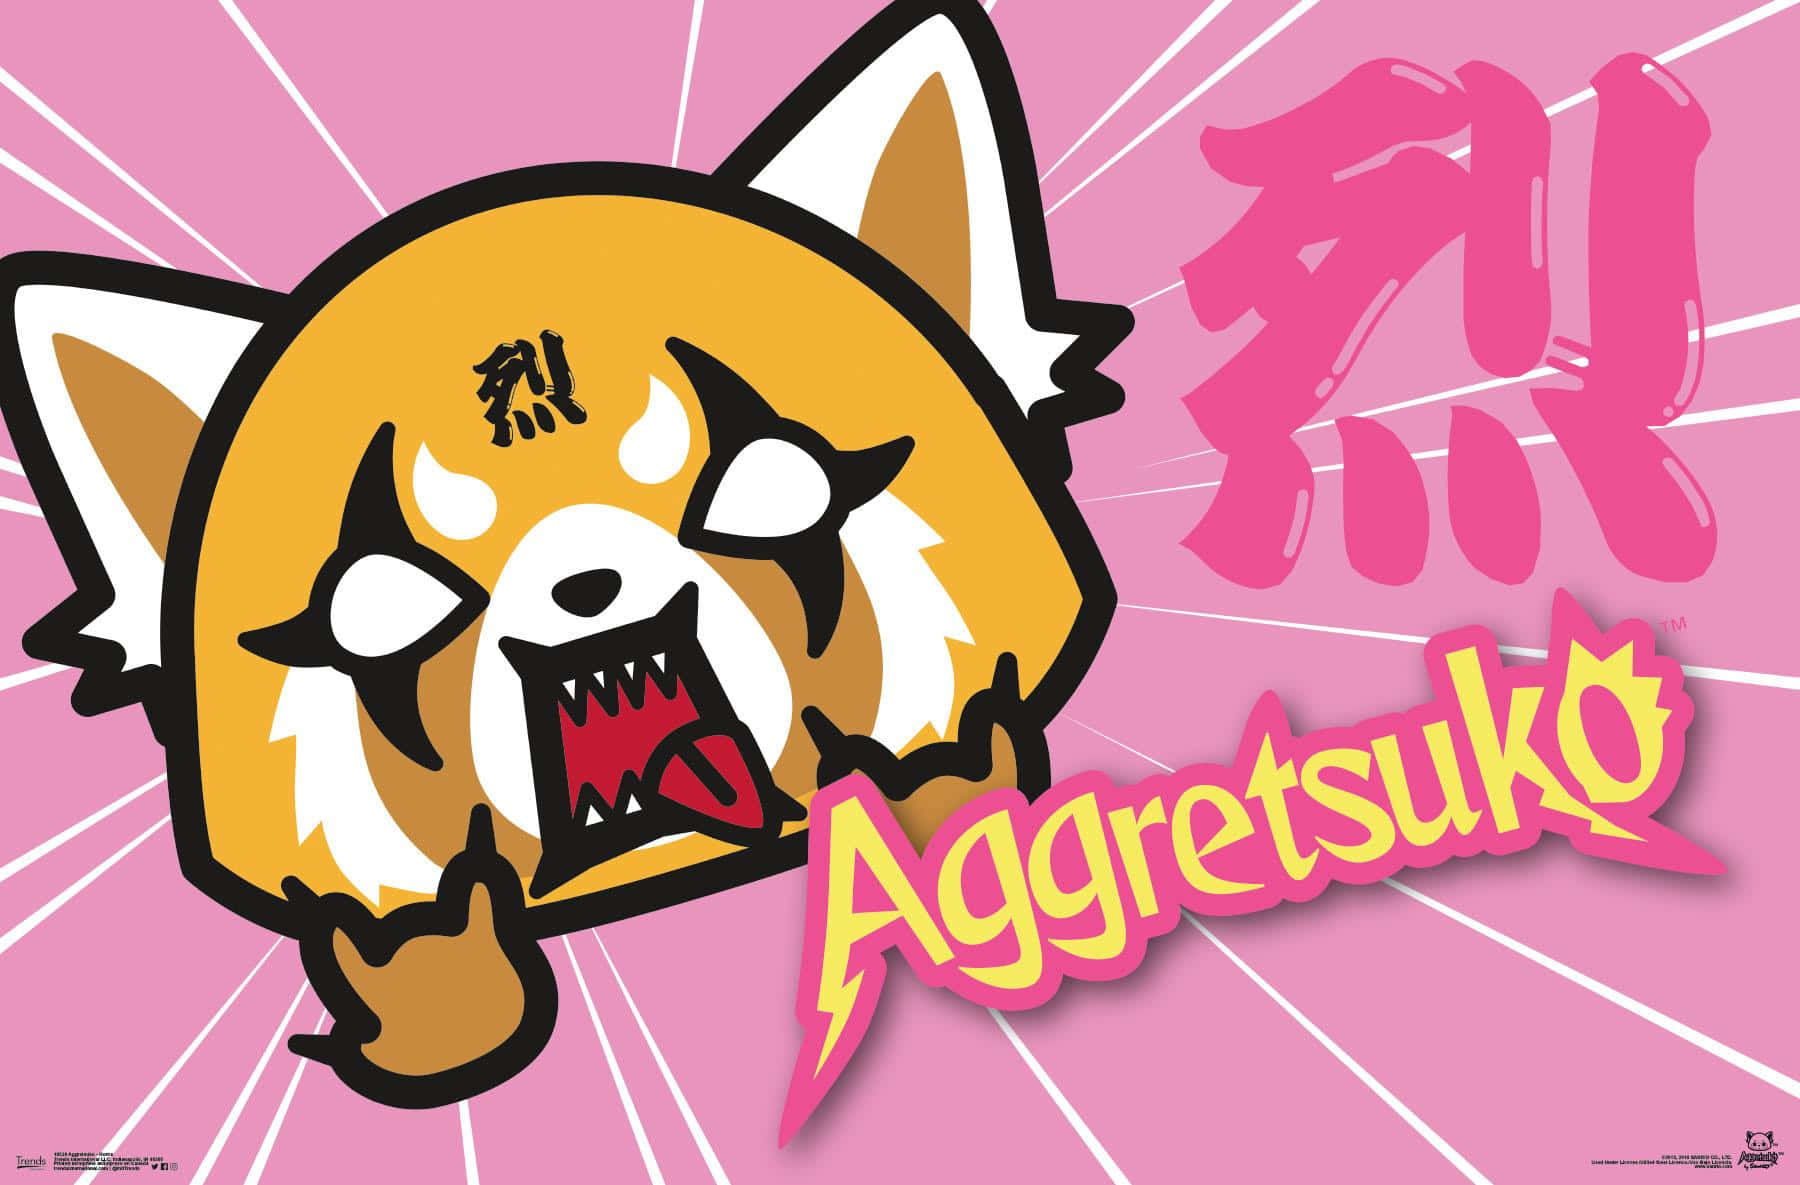 Aggretsuko is a sign of warrior's strength and courage as she faces her daily struggles with a smile.